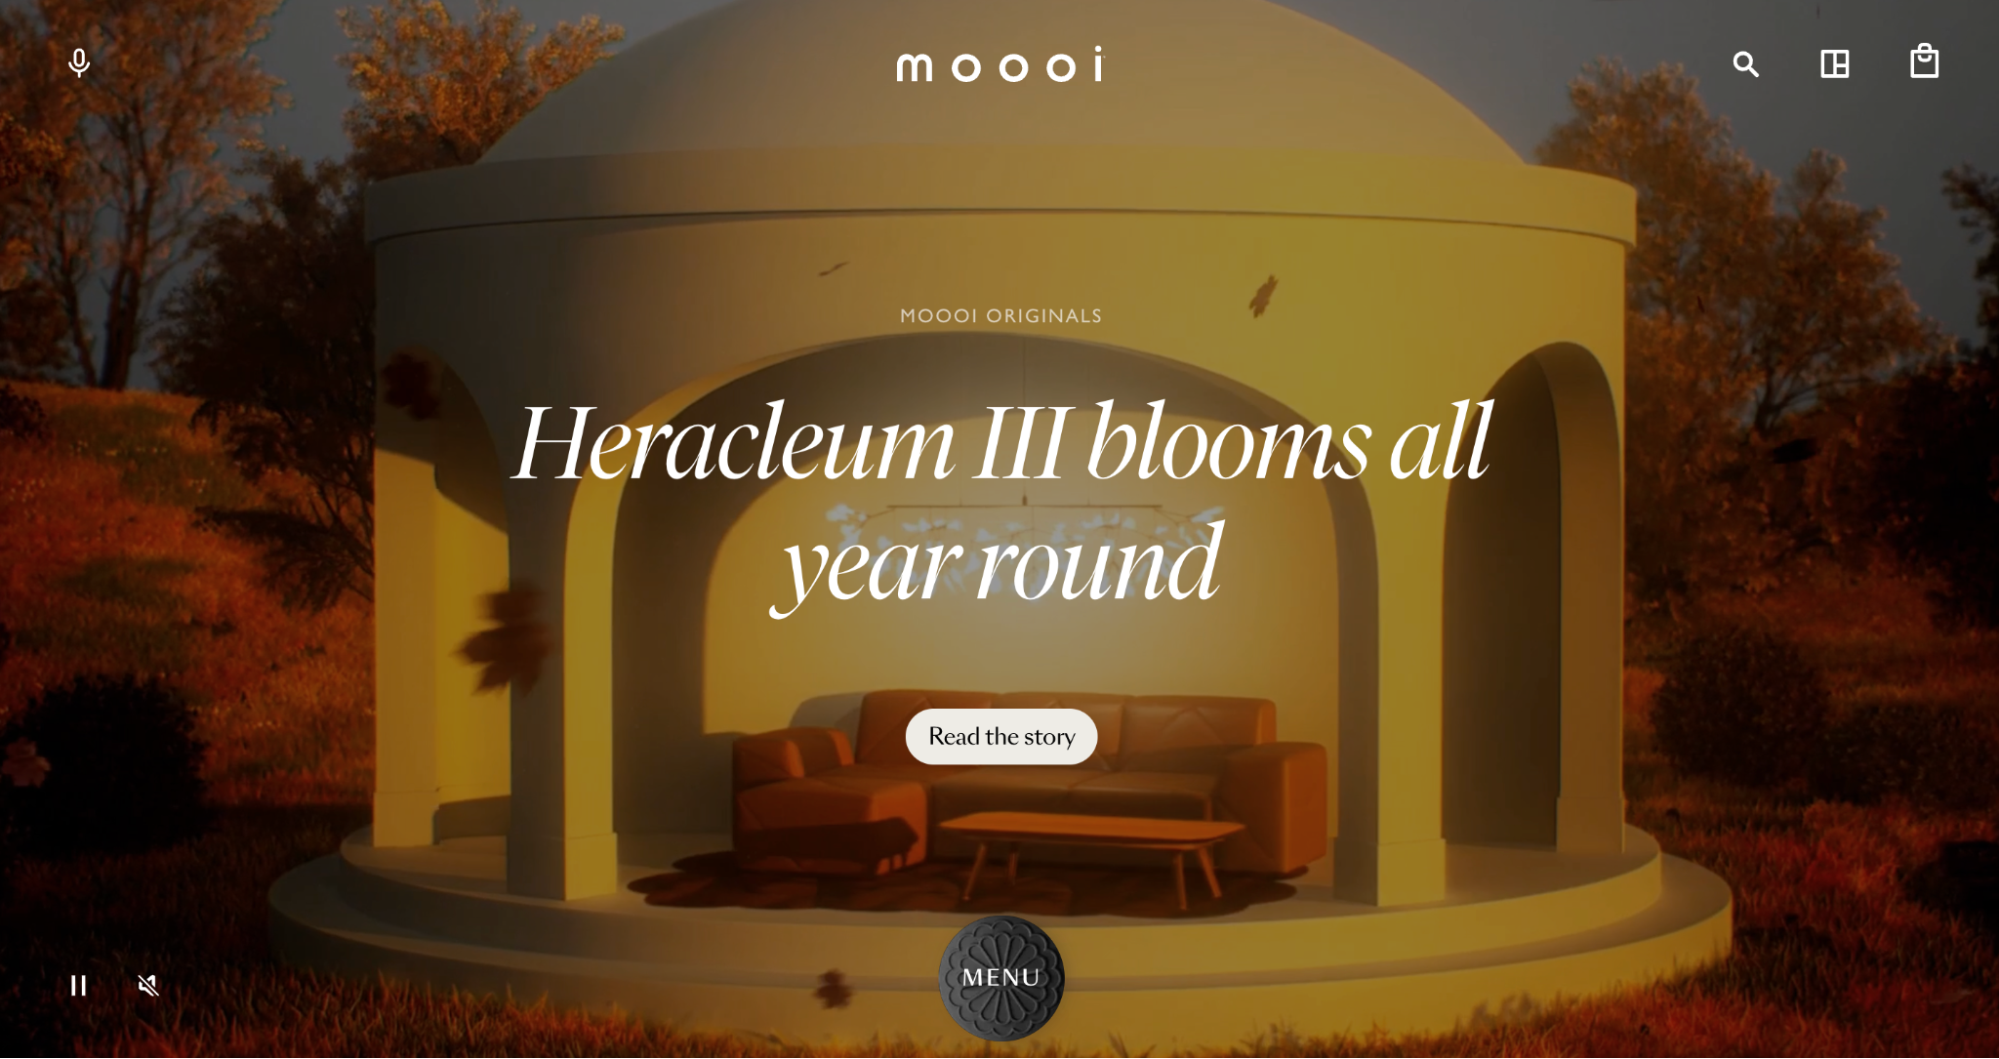 Moooi ecommerce direct-to-consumer brands